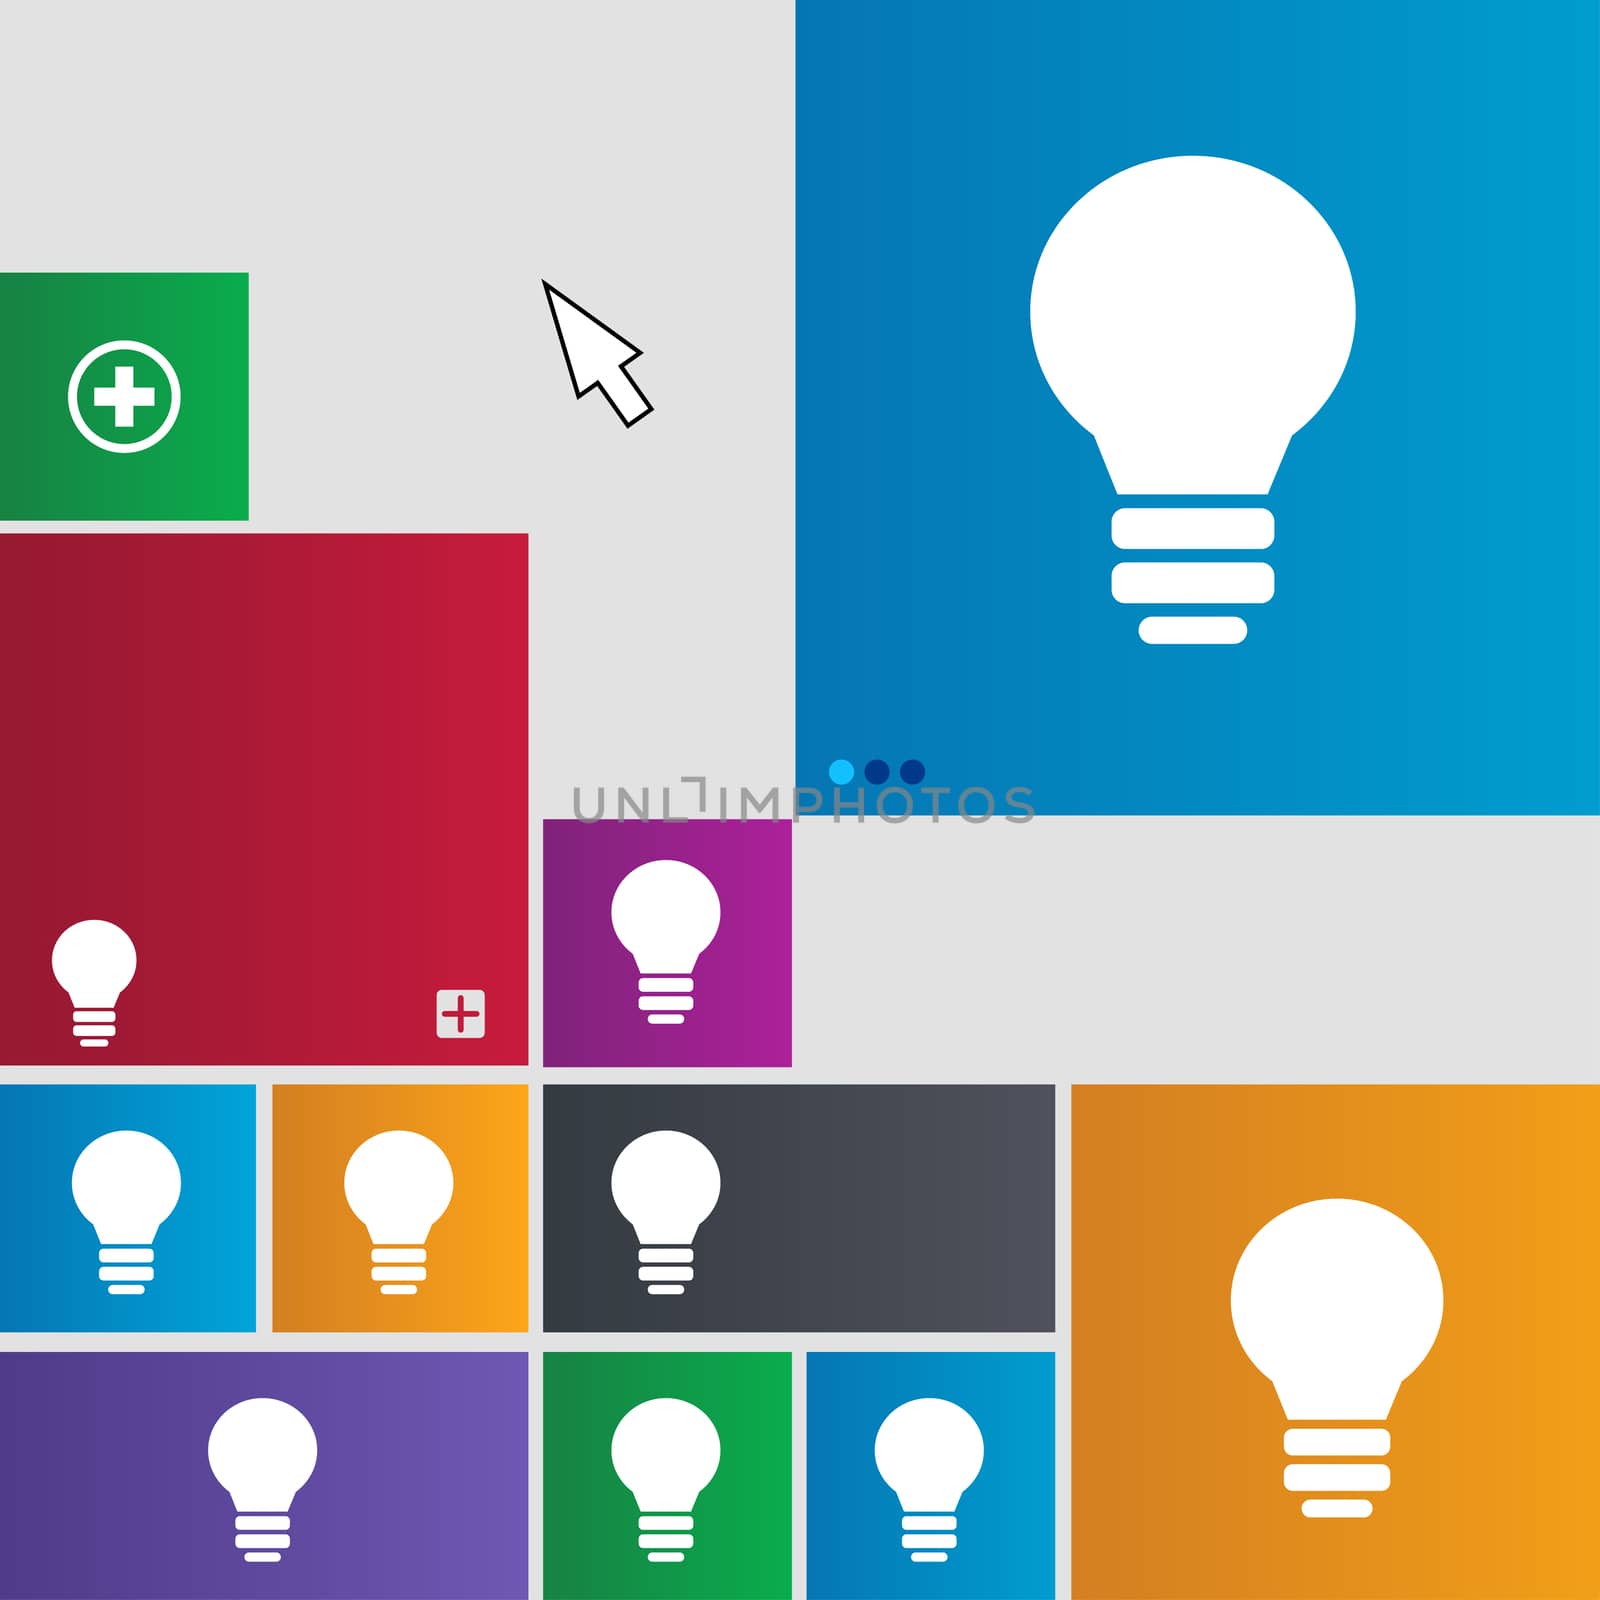 Light lamp, Idea icon sign. Metro style buttons. Modern interface website buttons with cursor pointer. illustration